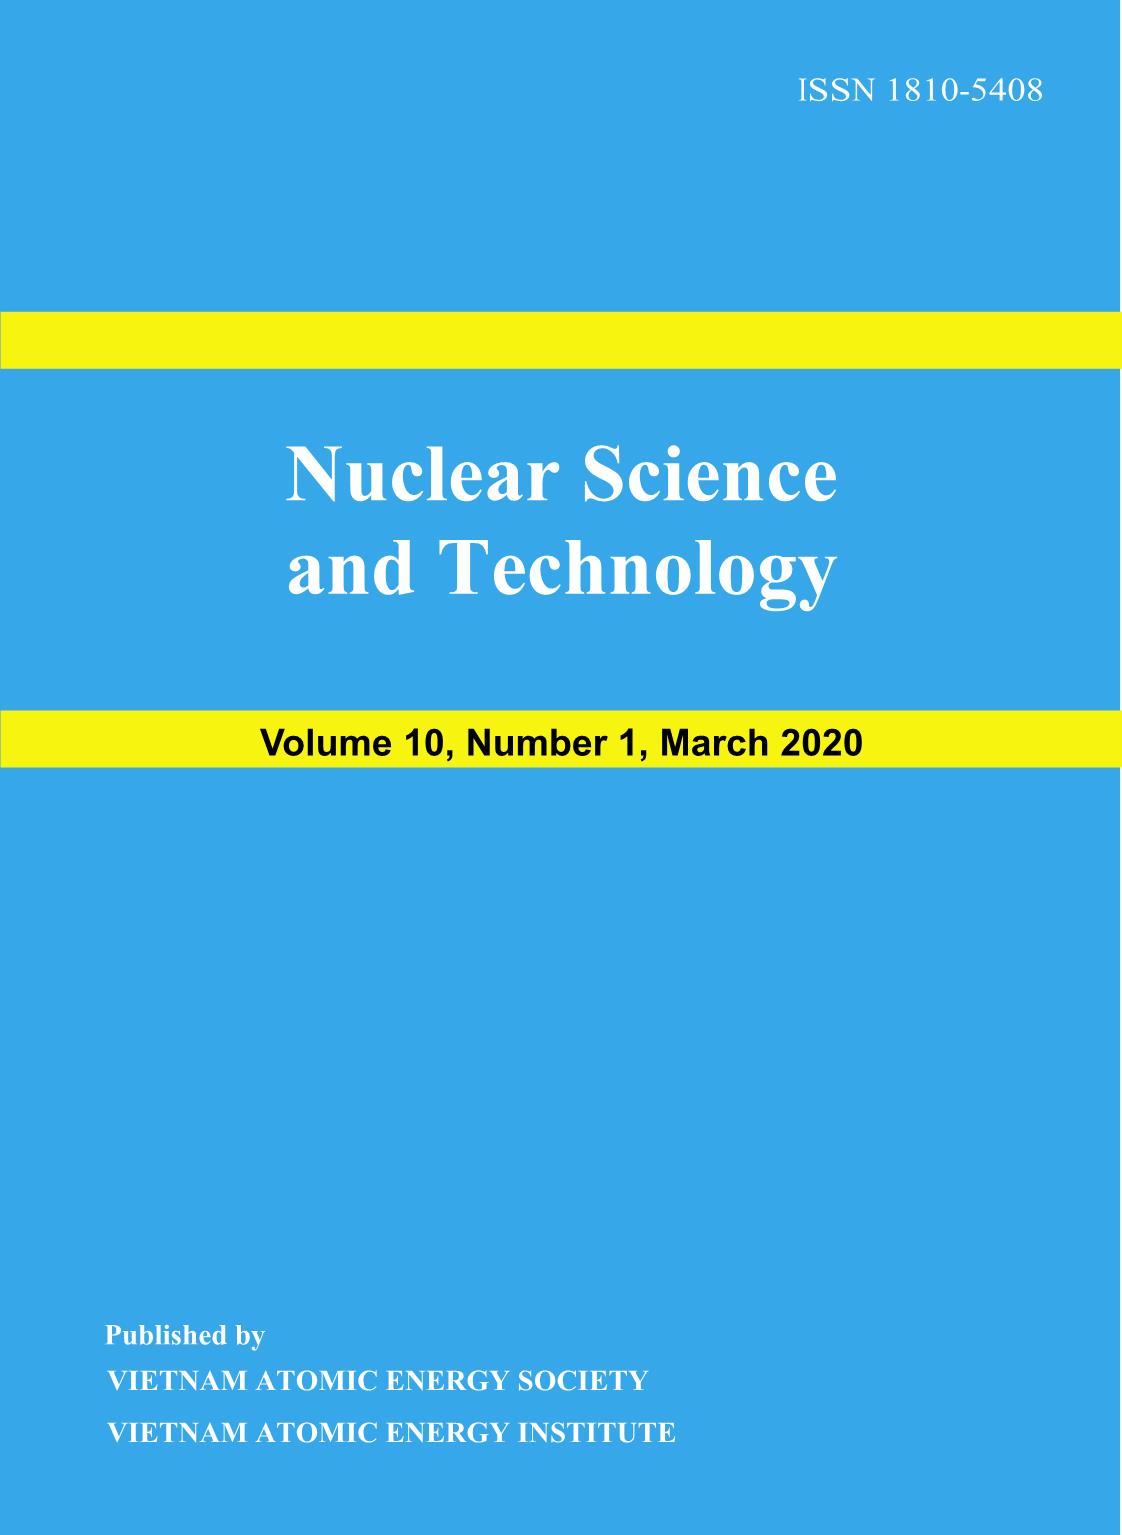 Nuclear Science and Technology - Volume 10, Number 1, March 2020 trang 1